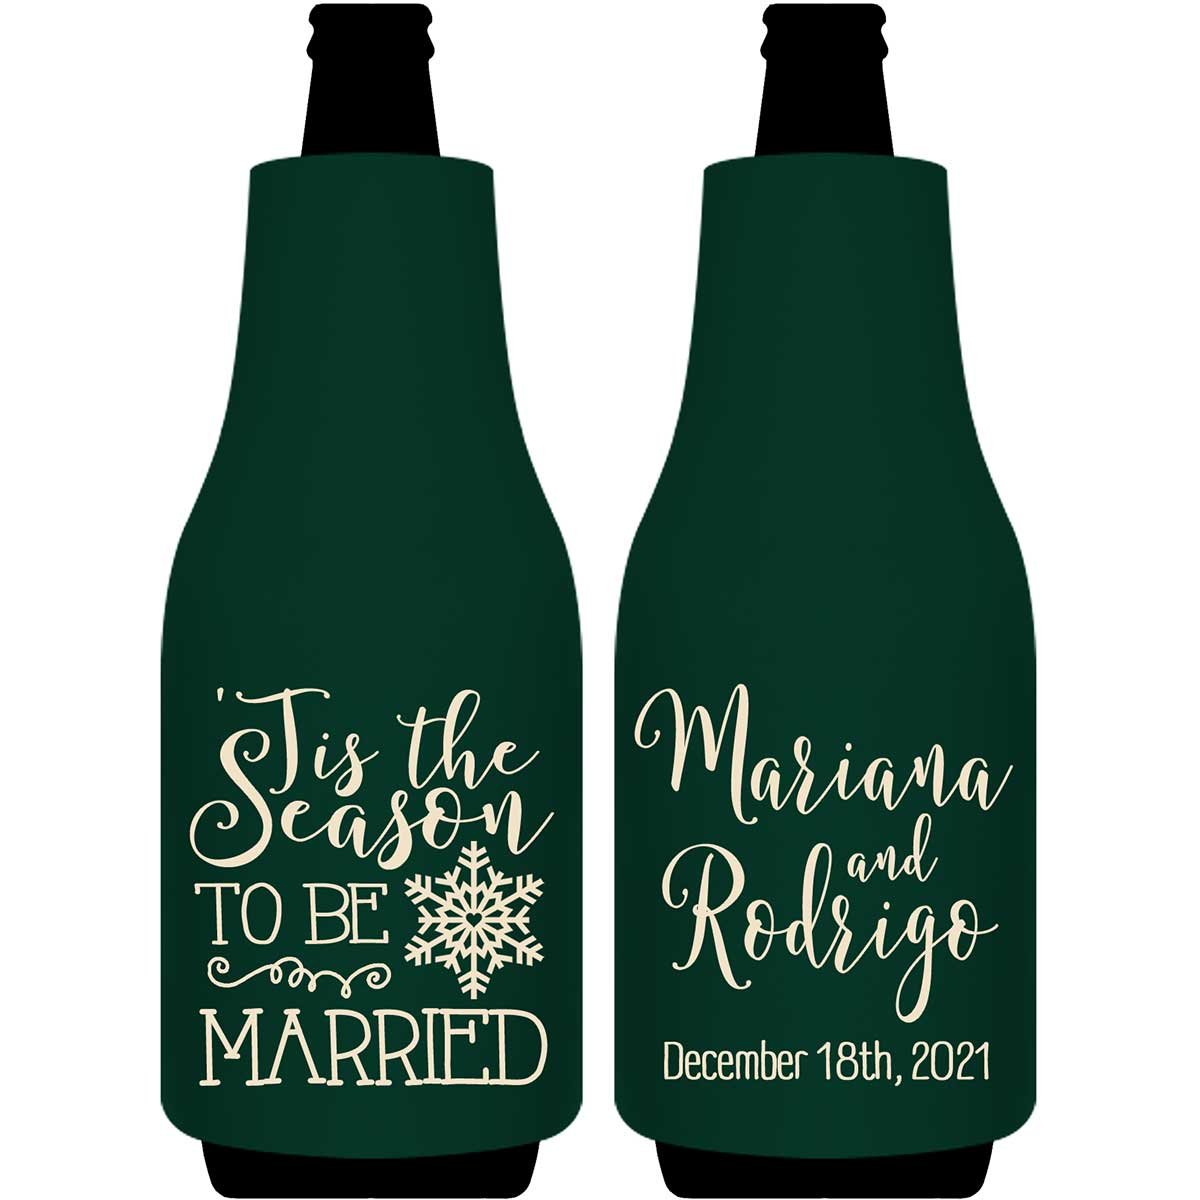 Tis The Season To Be Married 1A Foldable Bottle Sleeve Koozies Wedding Gifts for Guests